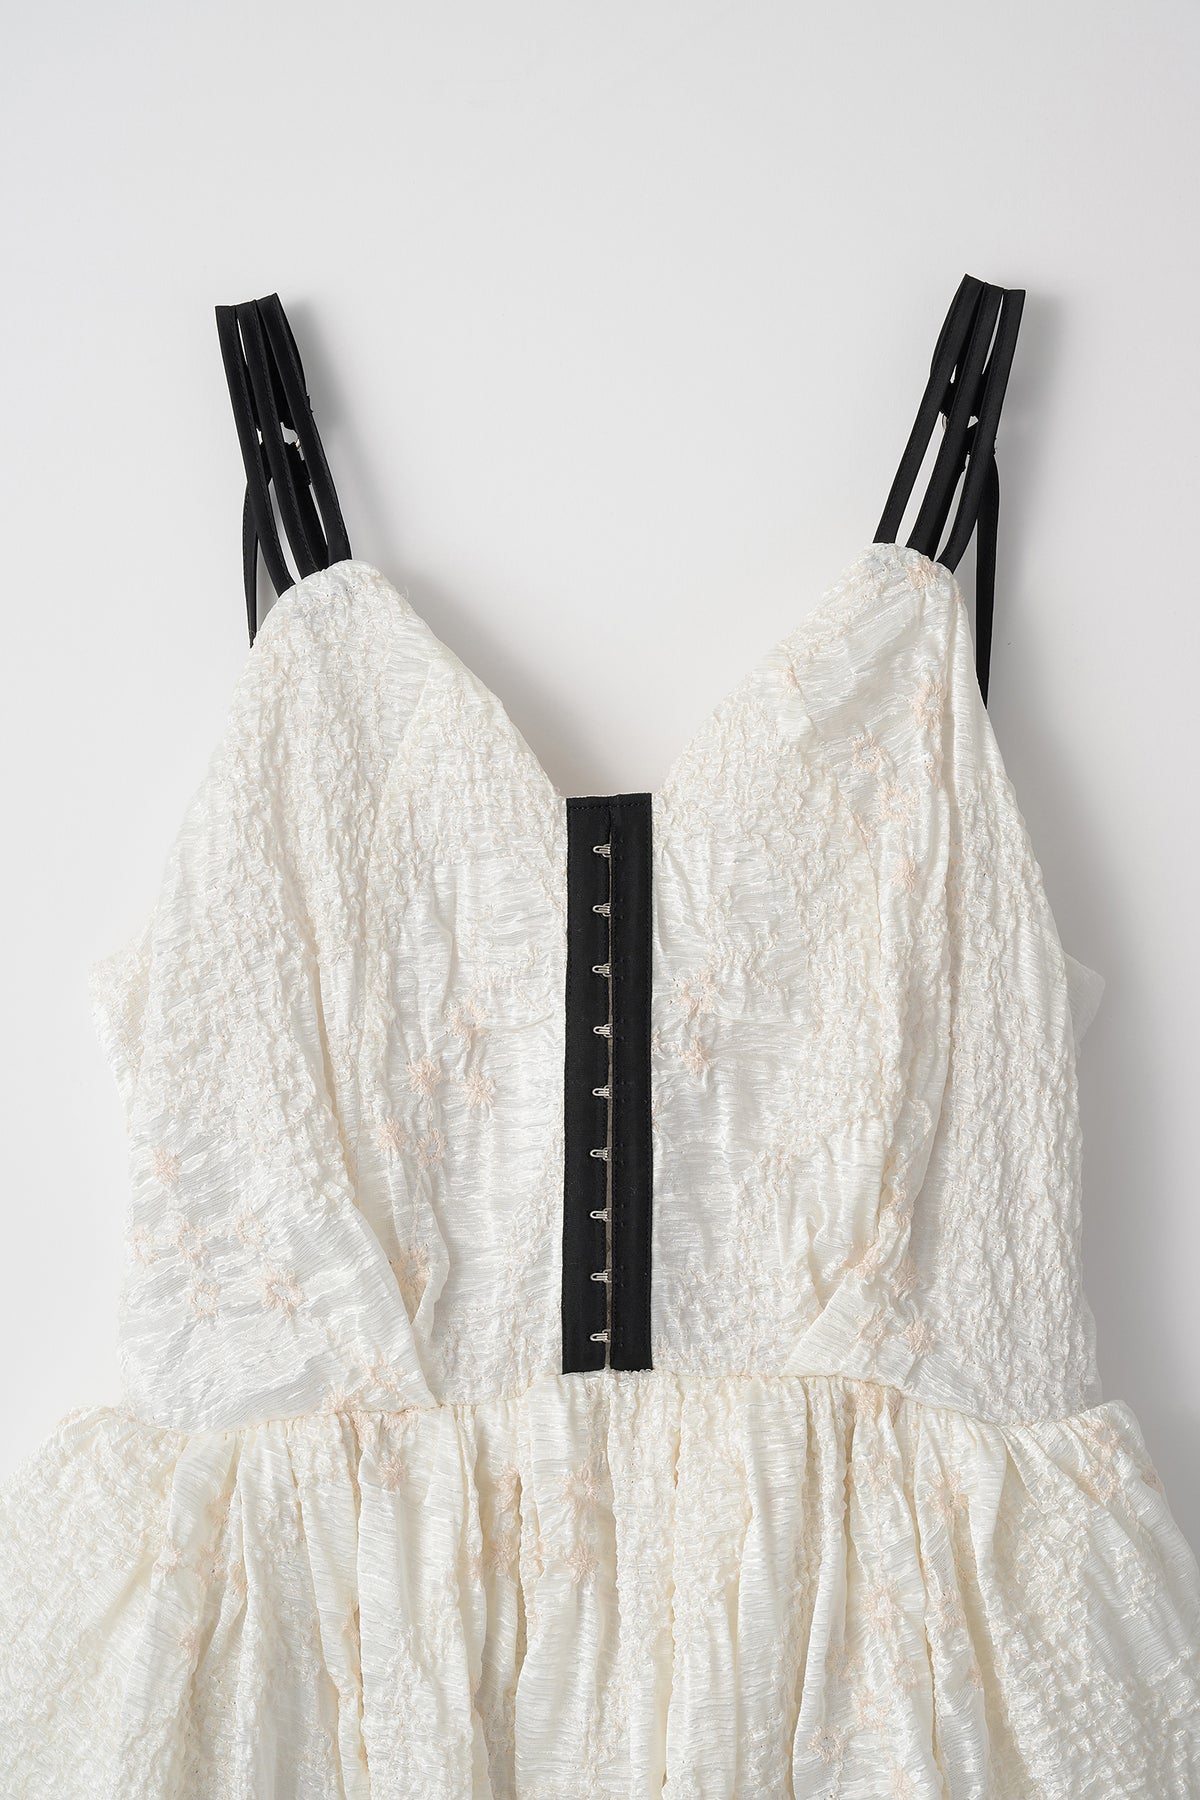 "Inflate" camisole dress (White)